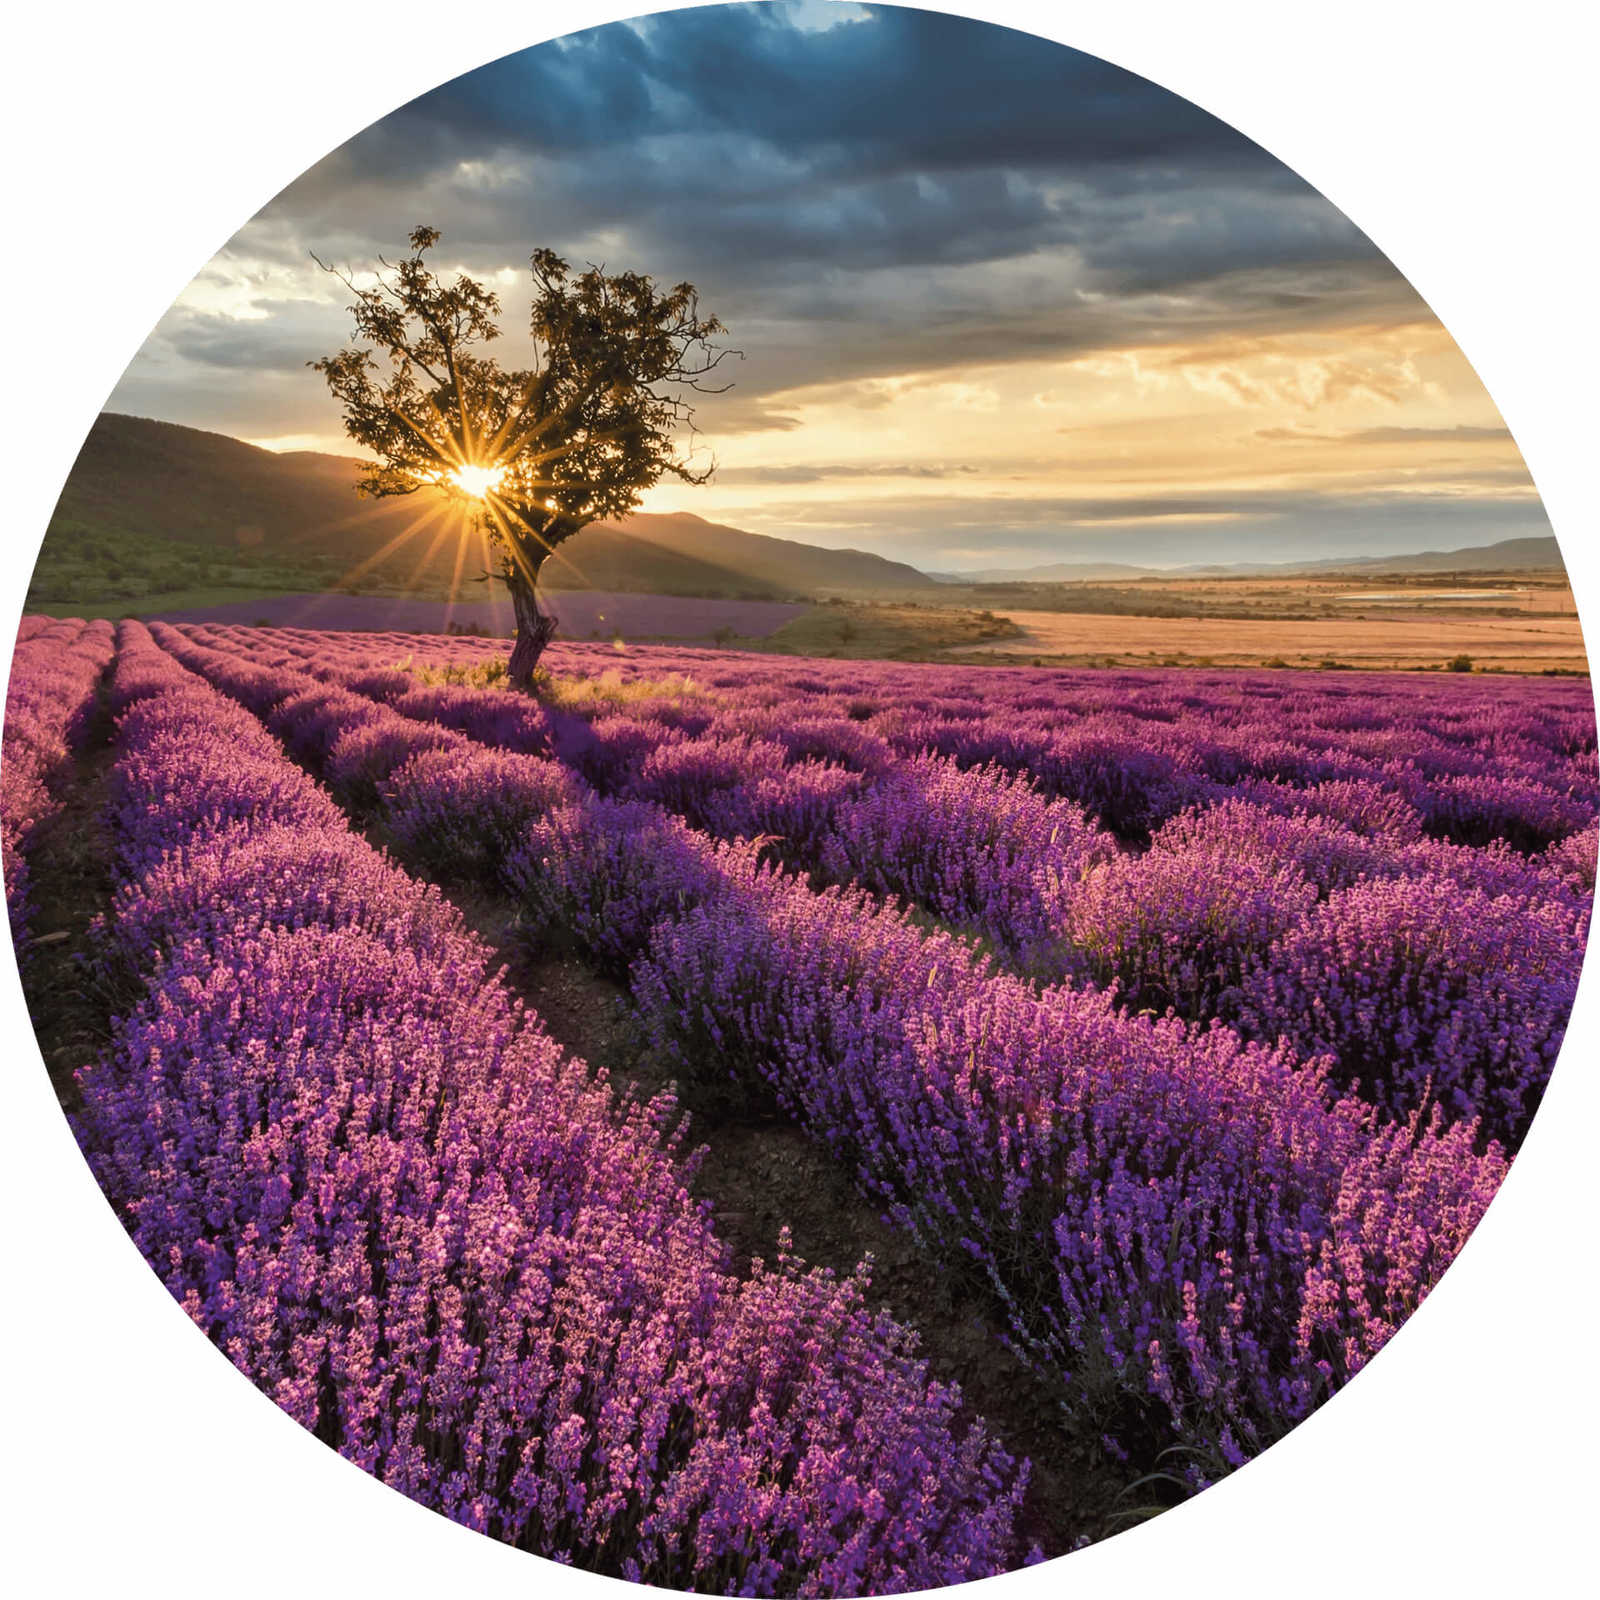         Photo wallpaper round lavender field in Provence
    